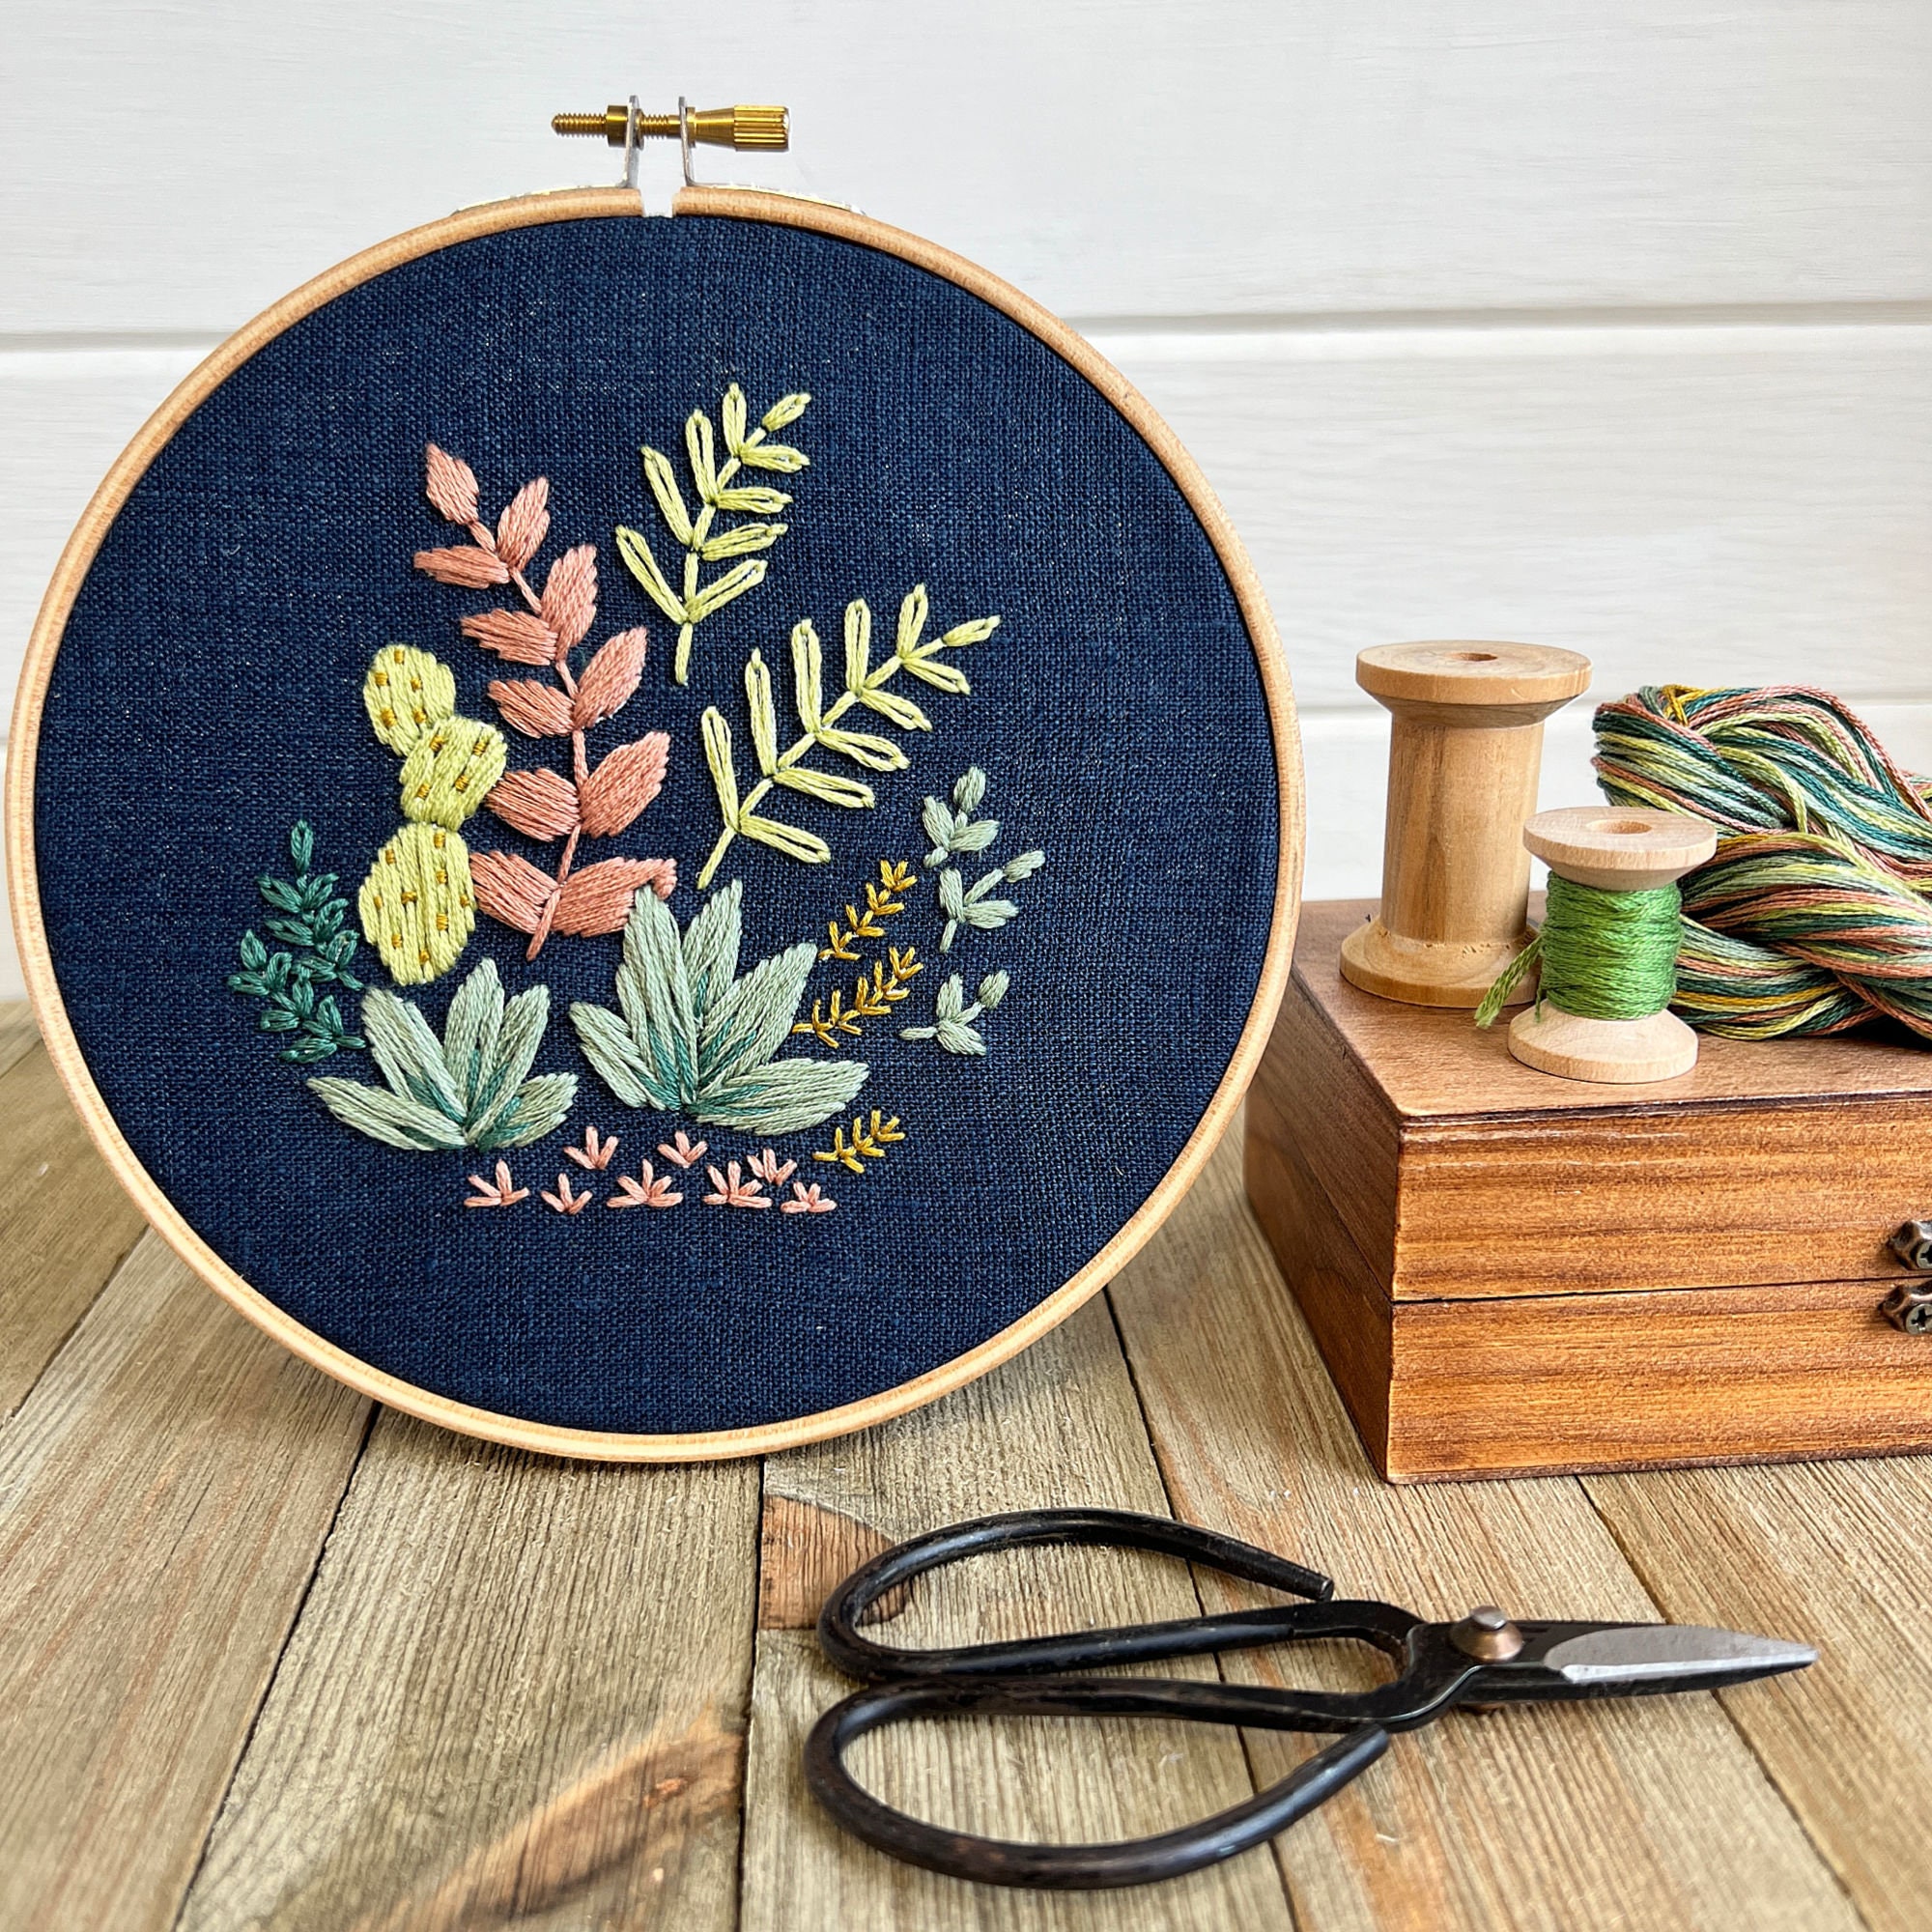 15 DIY Travel and Organizing Kits for Your Embroidery